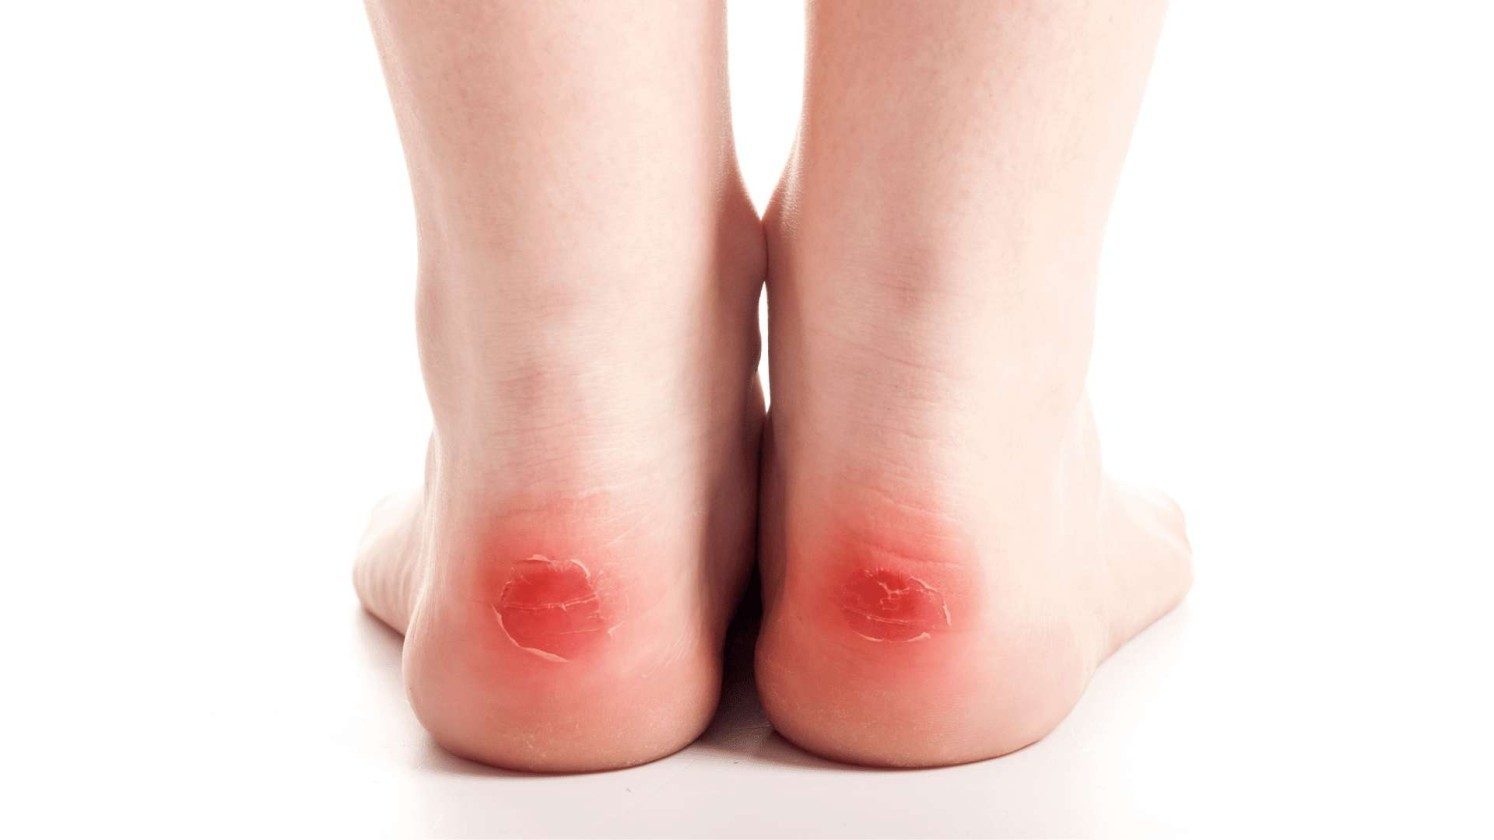 Shoe Rubs on the Back of Ankle: How to Prevent Discomfort